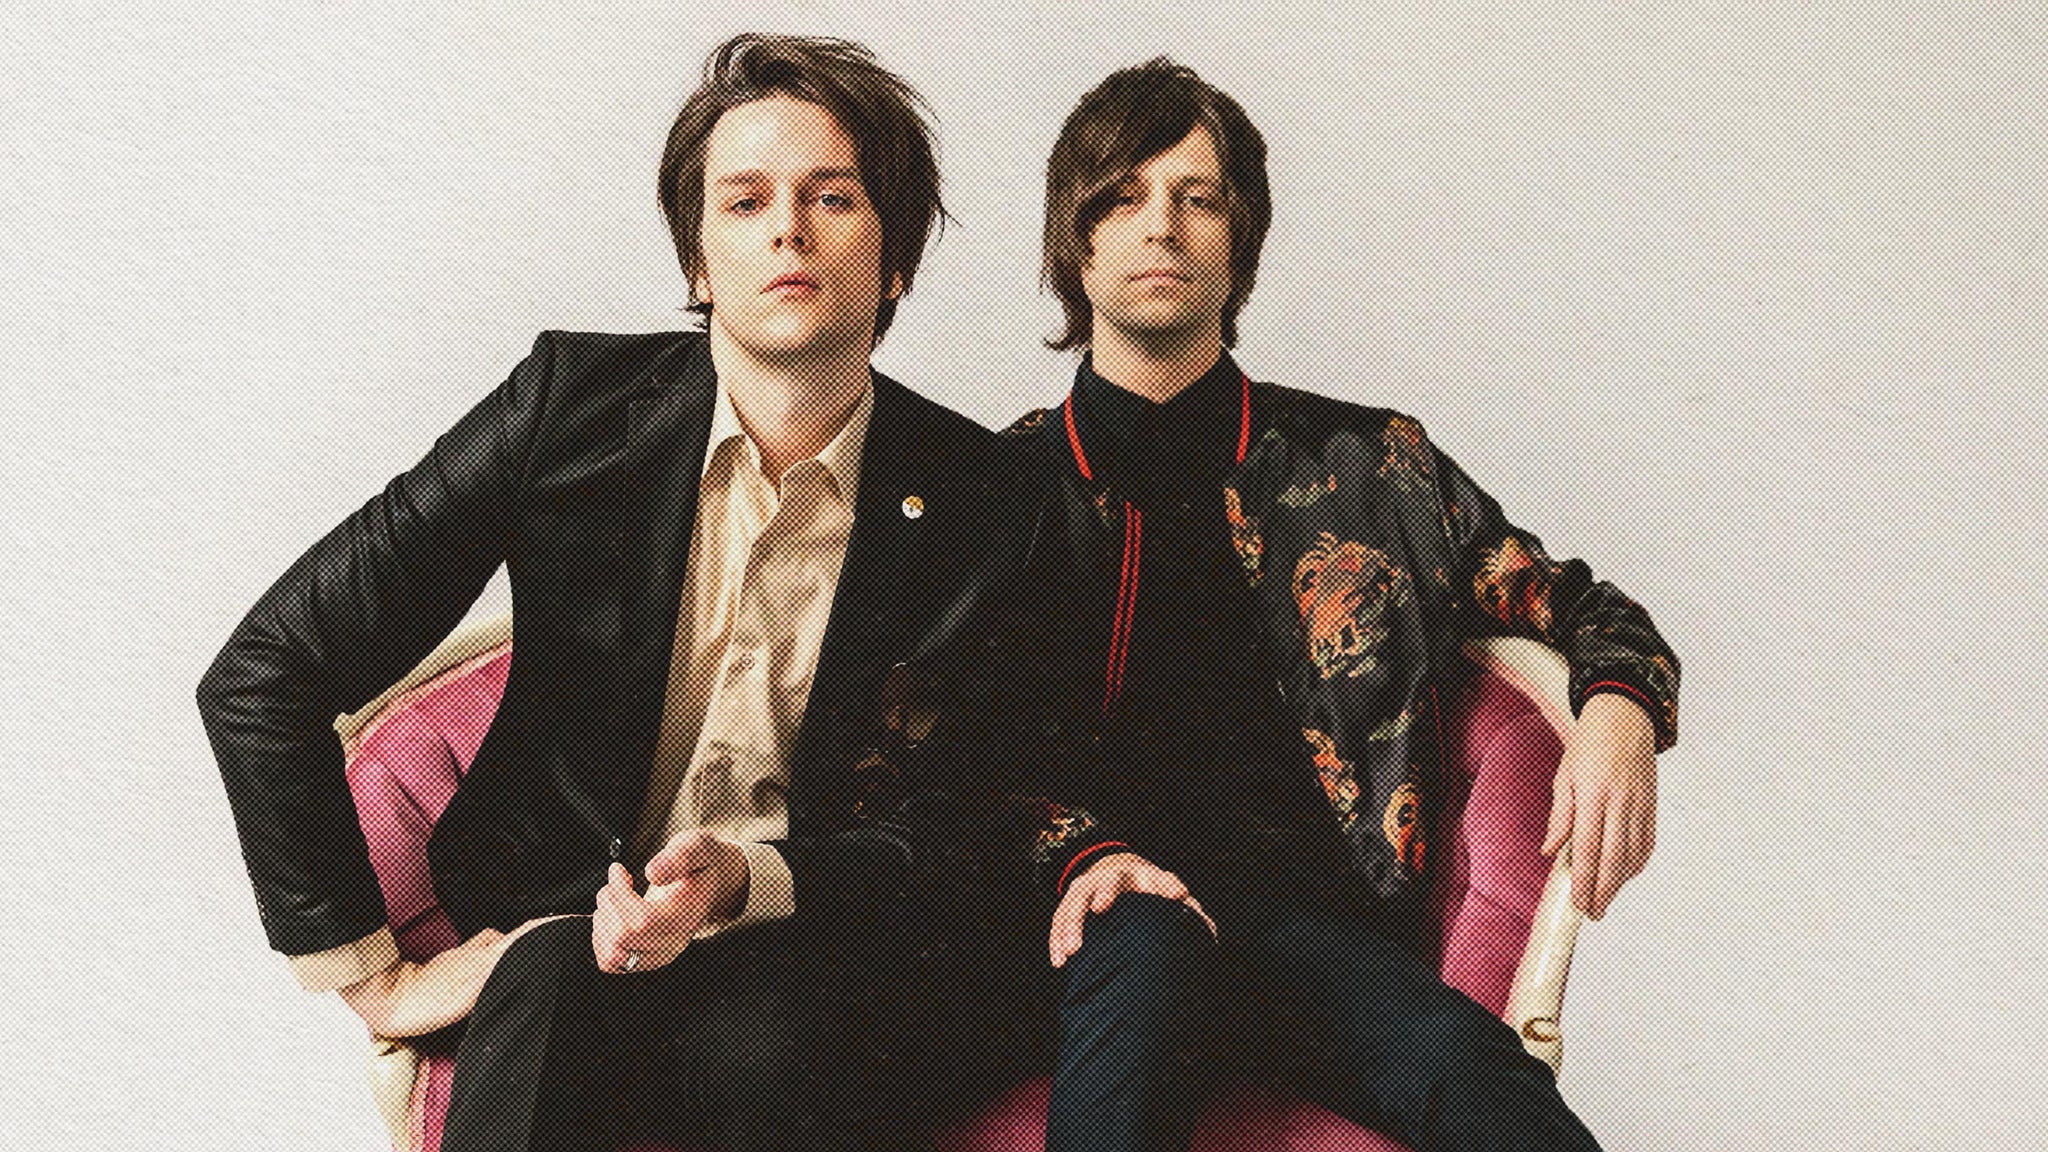 iDKHOW presents The Thought Reform Tour at Neptune Theatre